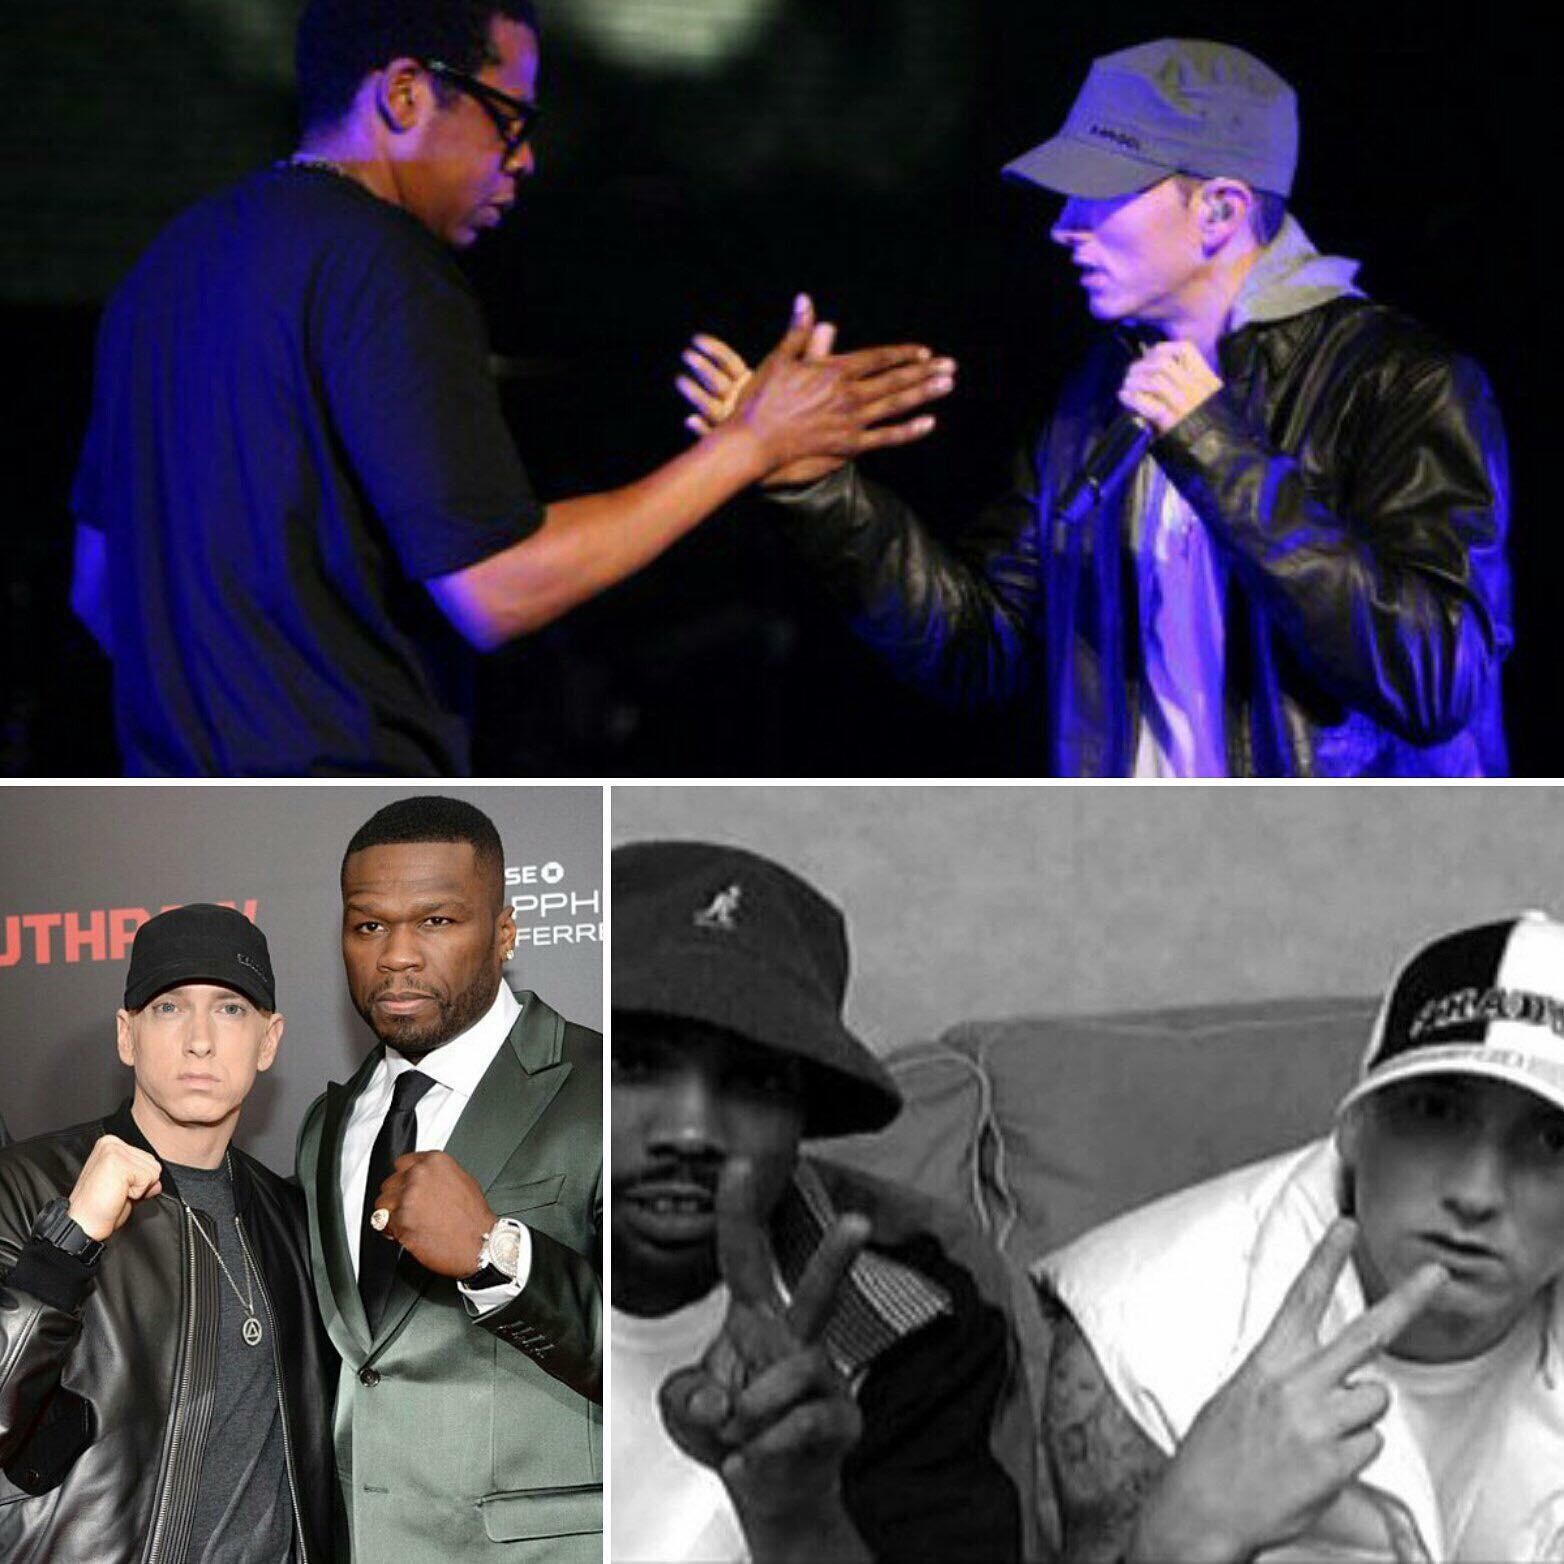 Eminem has drawn every game of rock, paper, scissors he’s ever played